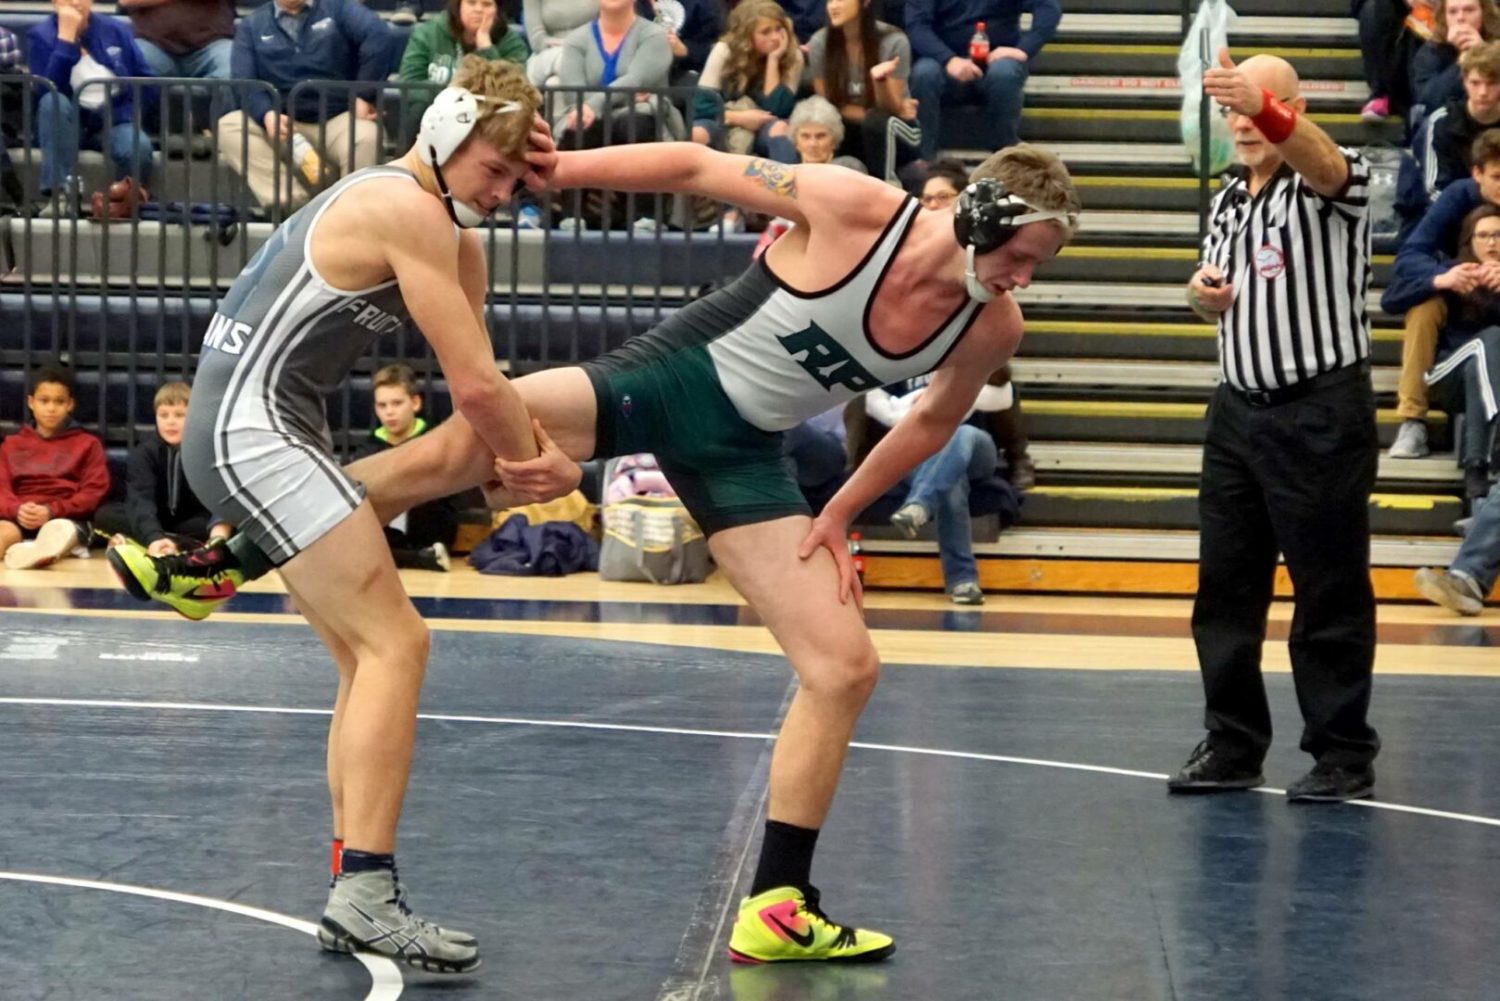 Reeths-Puffer wrestlers beat back challenge from rising Fruitport squad